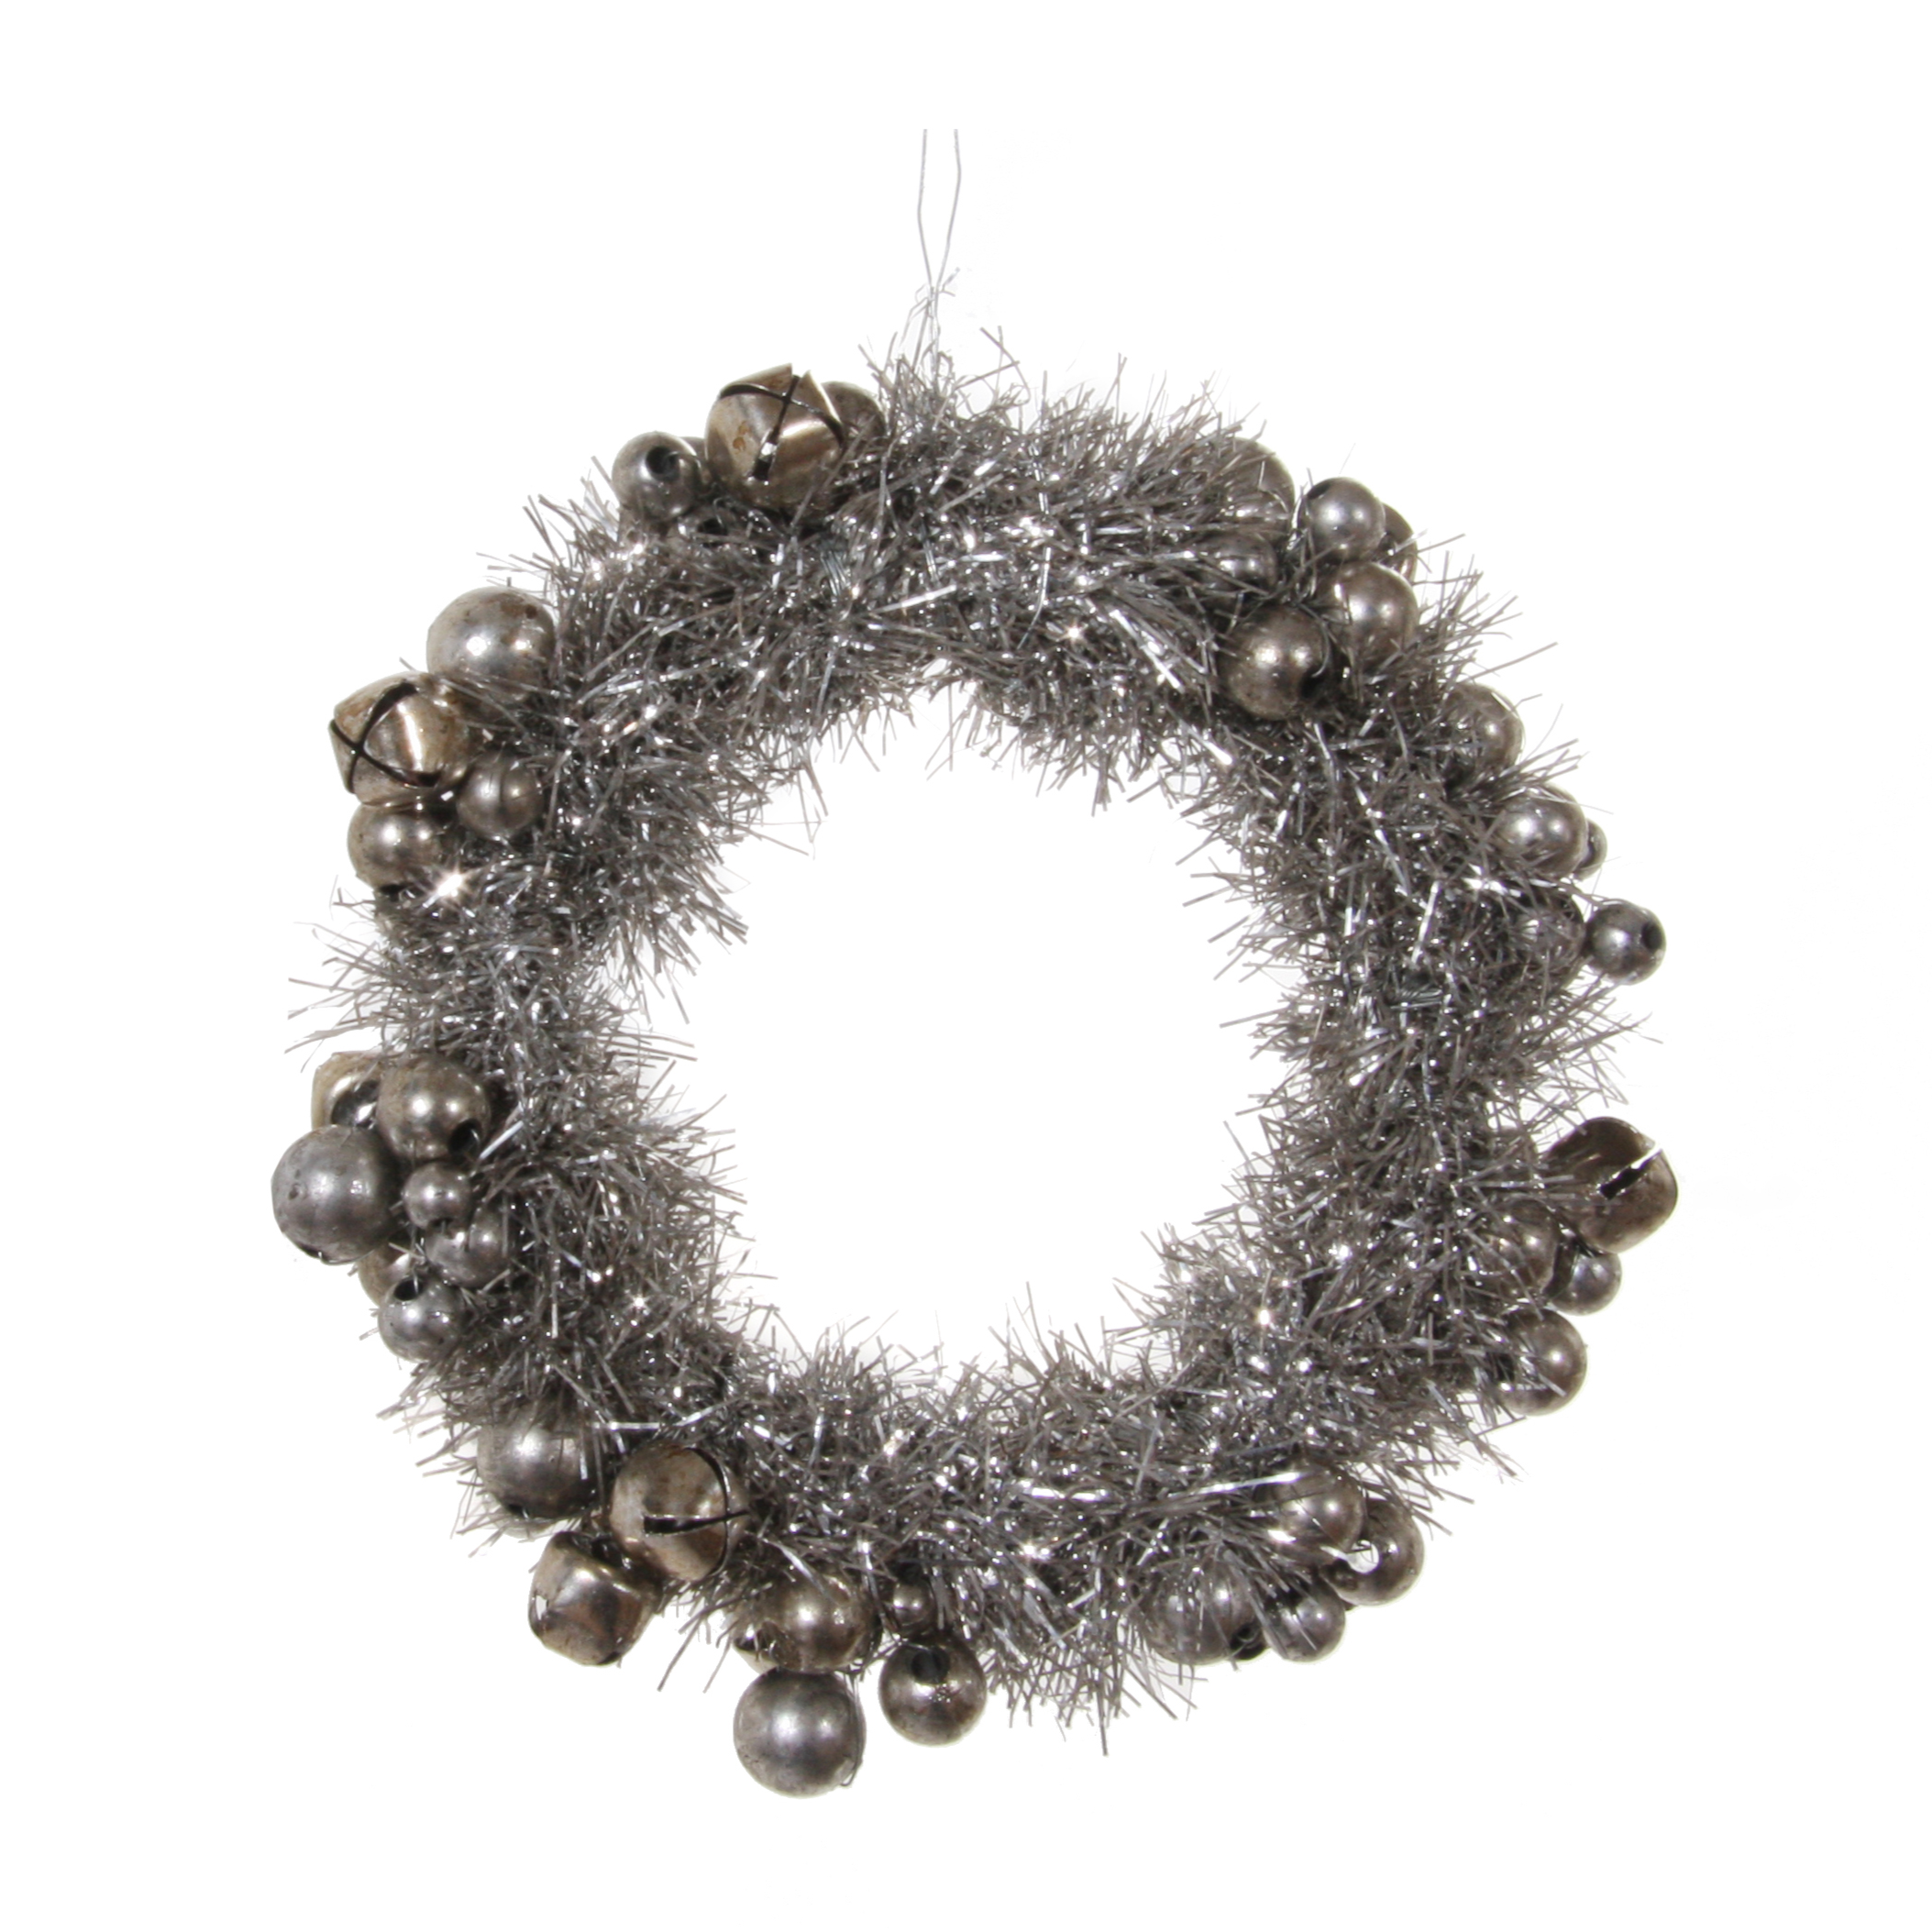 Silver Tinsel Wreath with Jingle Bells